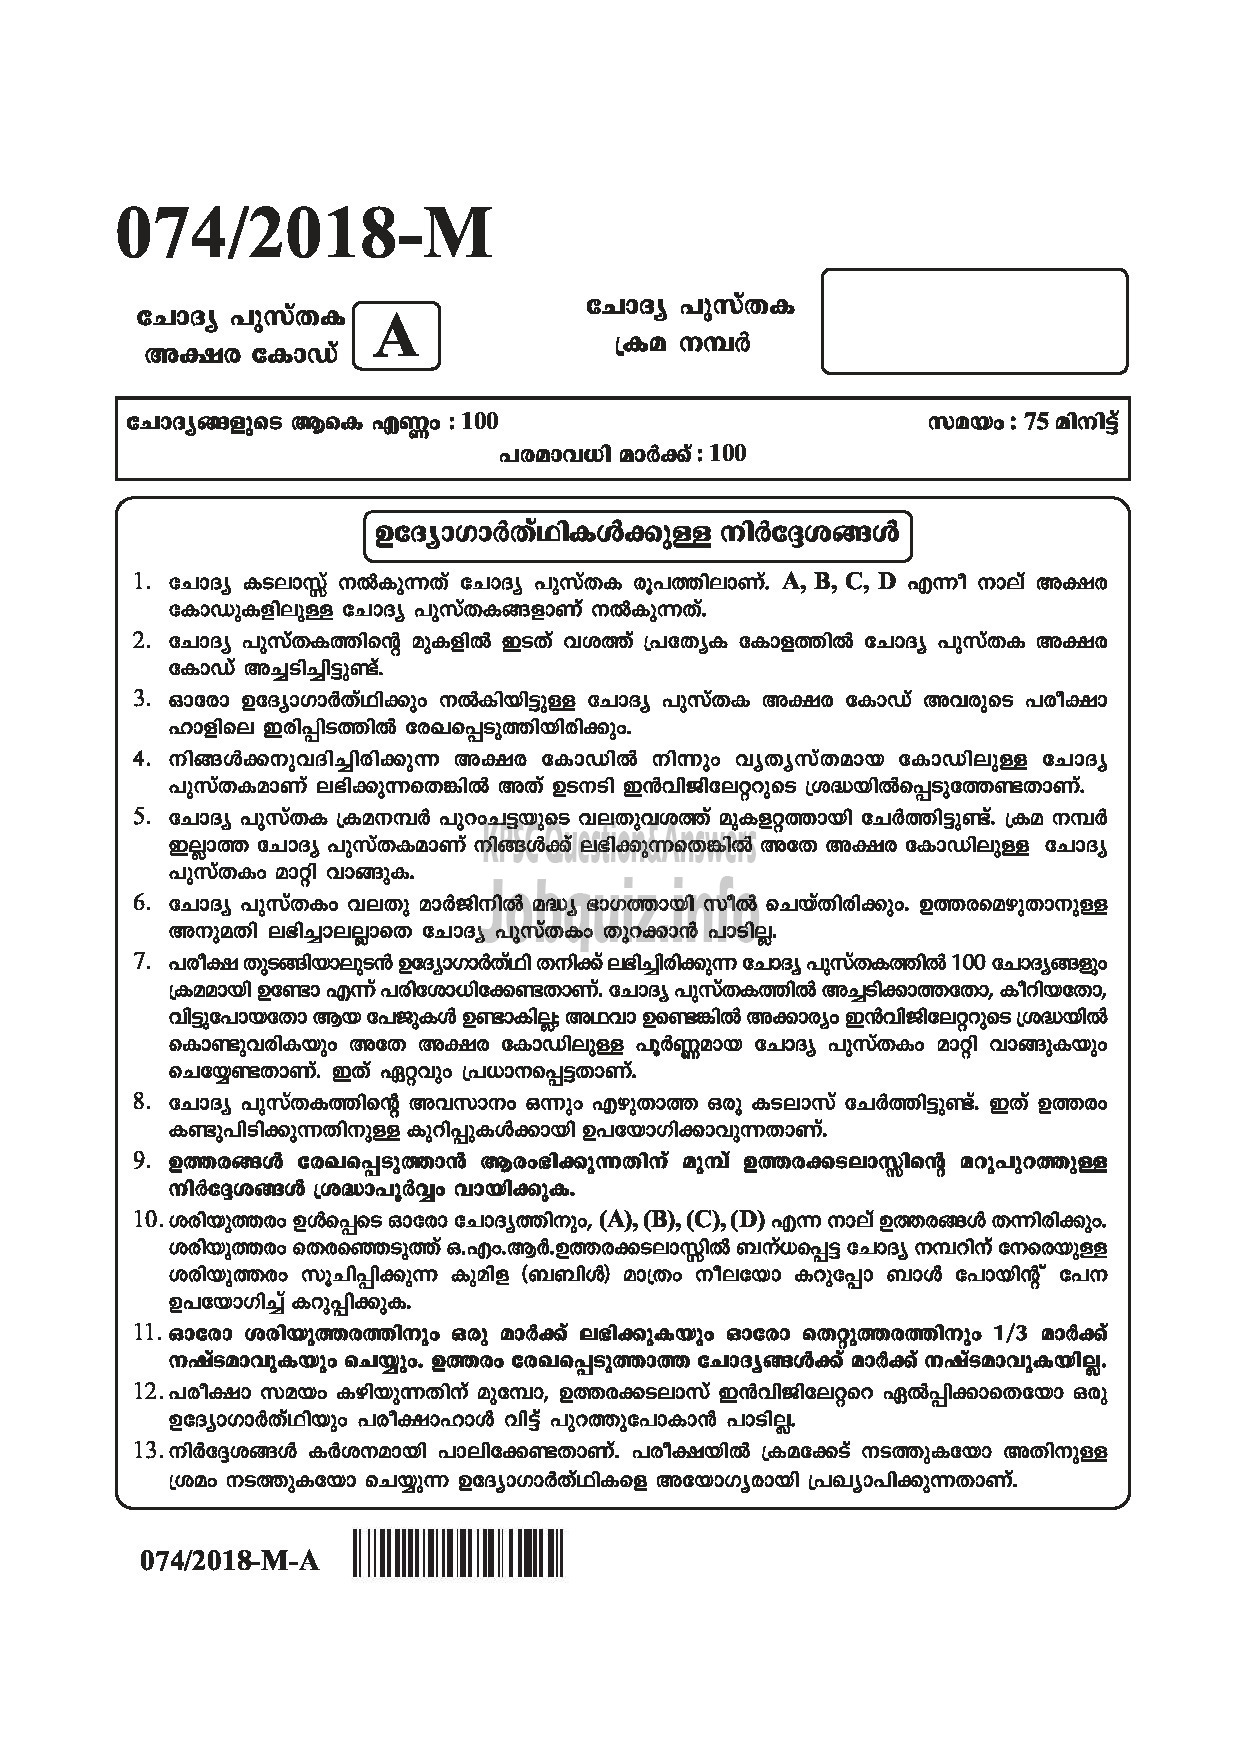 Kerala PSC Question Paper - POLICE CONSTABLE DRIVER ARMED POLICE BATTALION POLICE-1